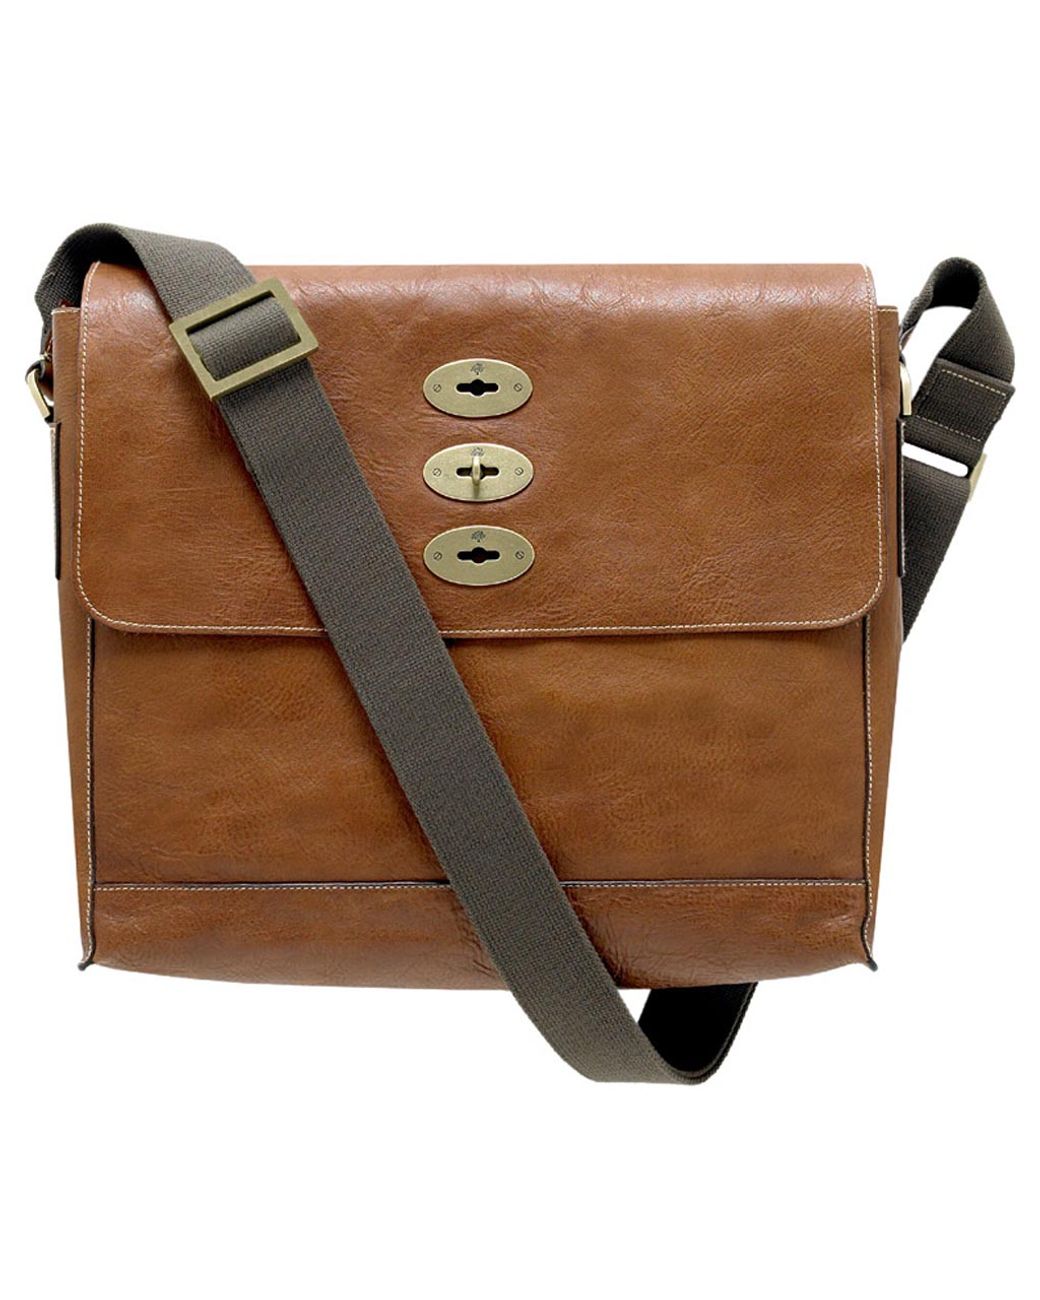 Mulberry Brynmore Natural Leather Messenger Bag in Brown for Men | Lyst